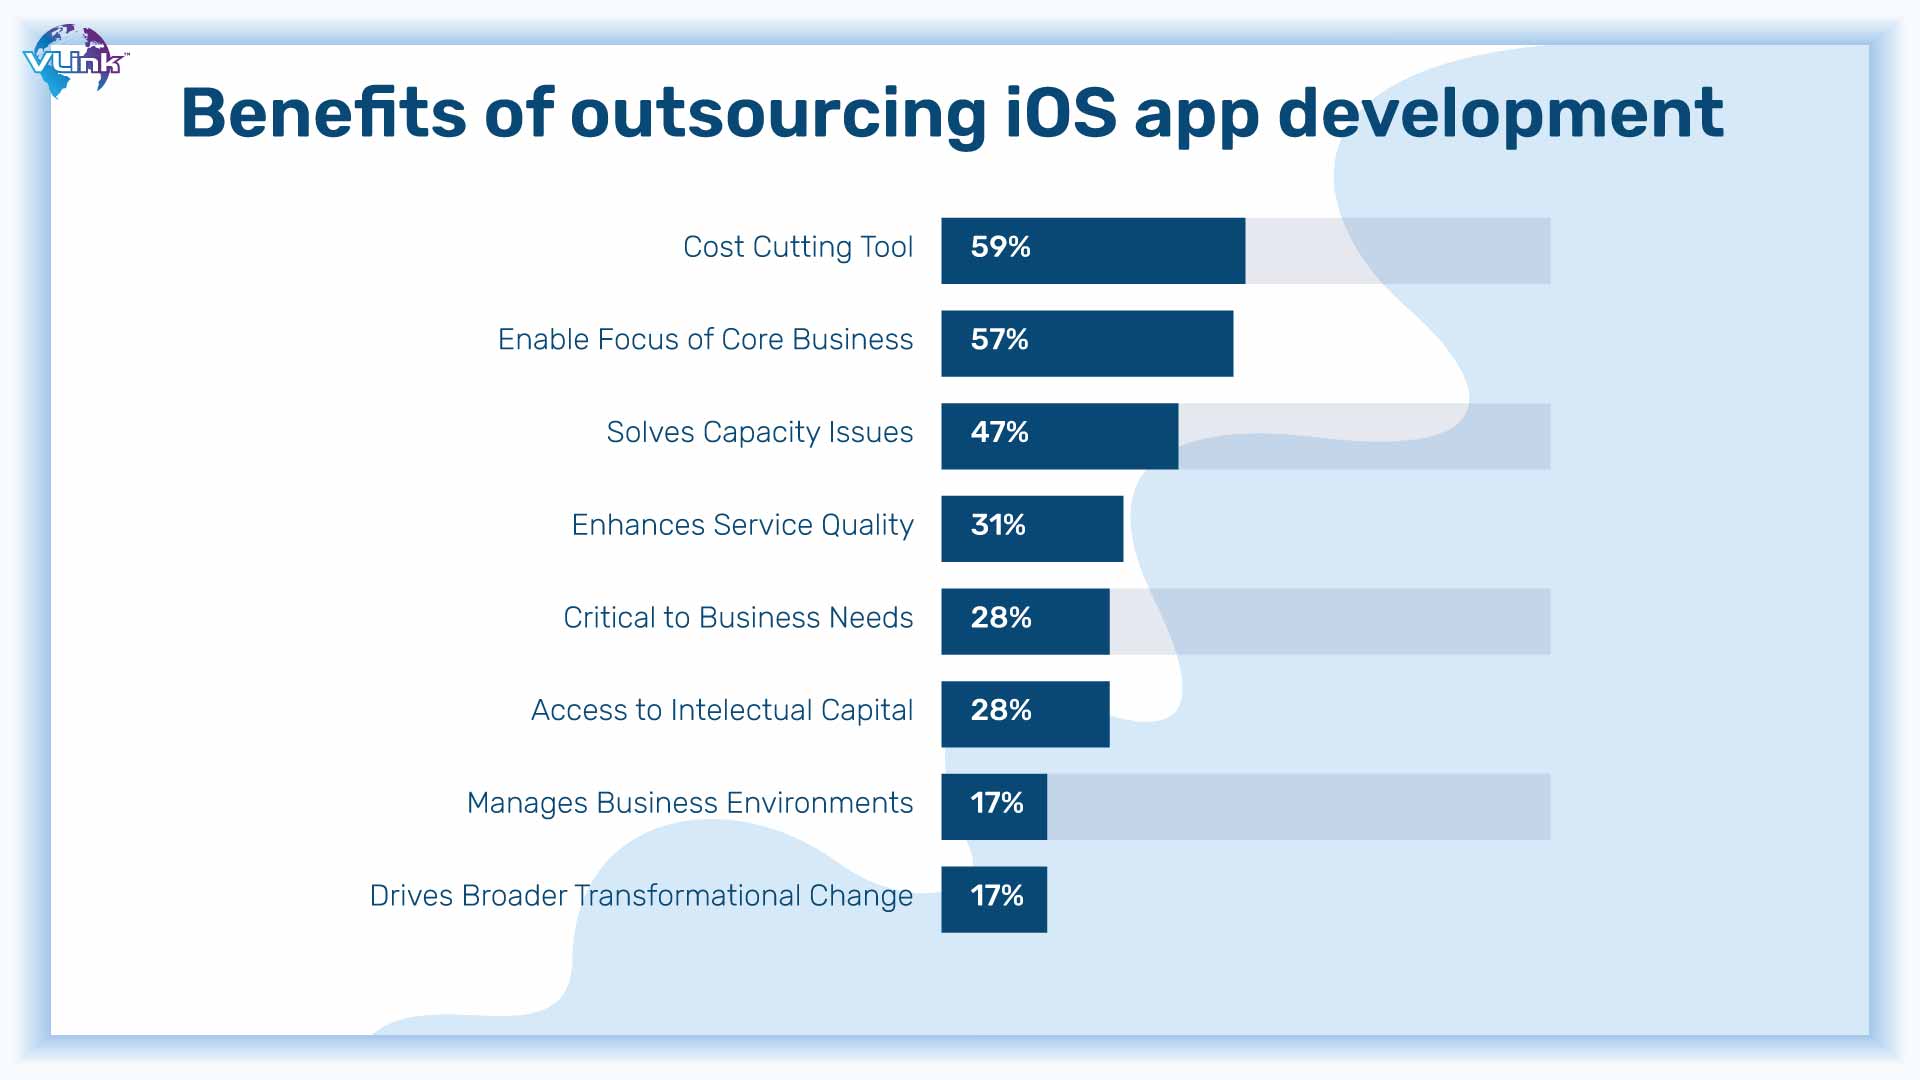 Benefits of Outsourcing iOS App Development